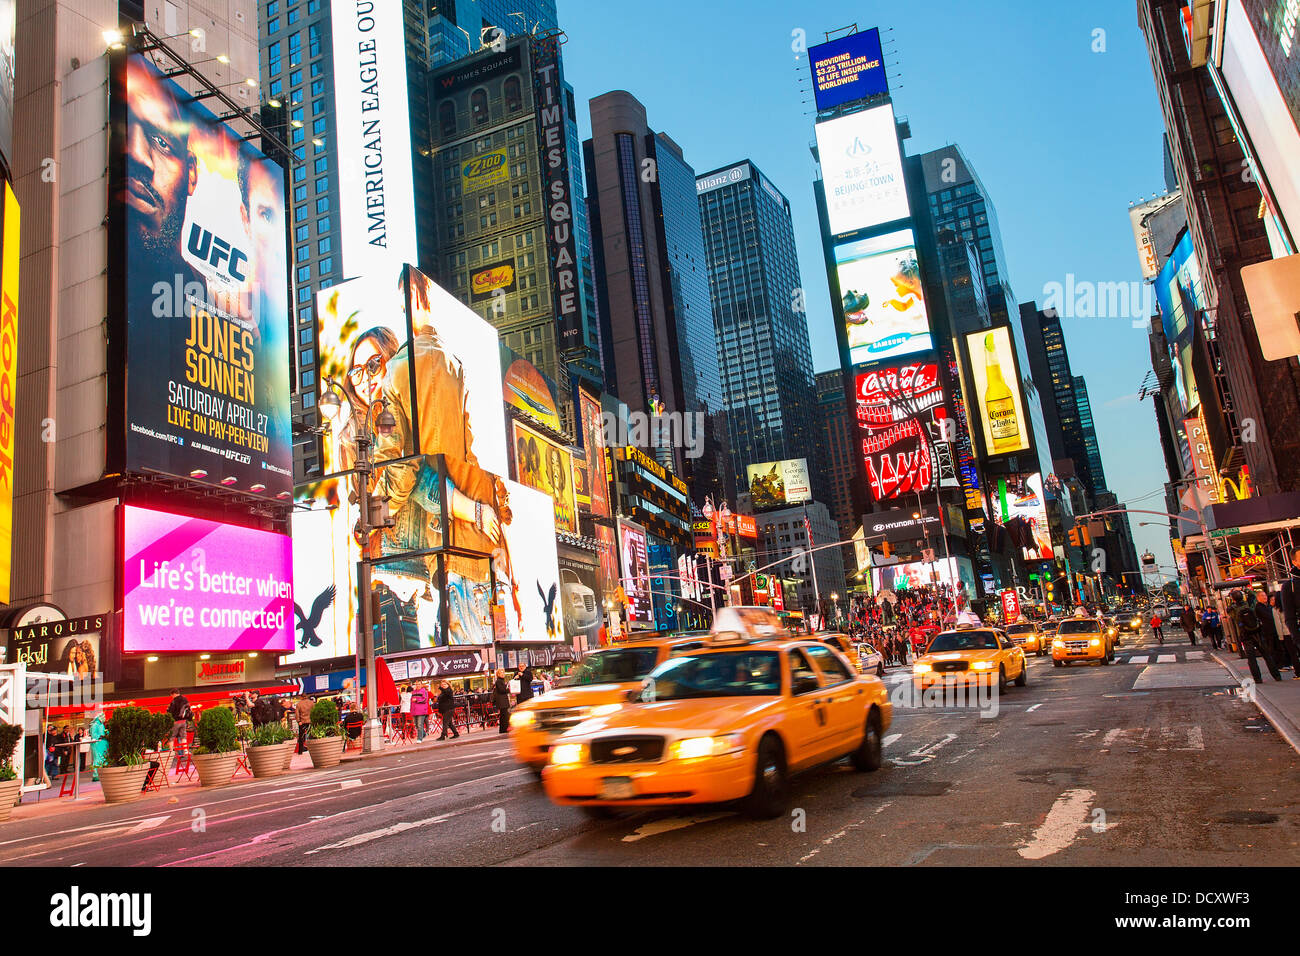 New York City, Times square Stock Photo